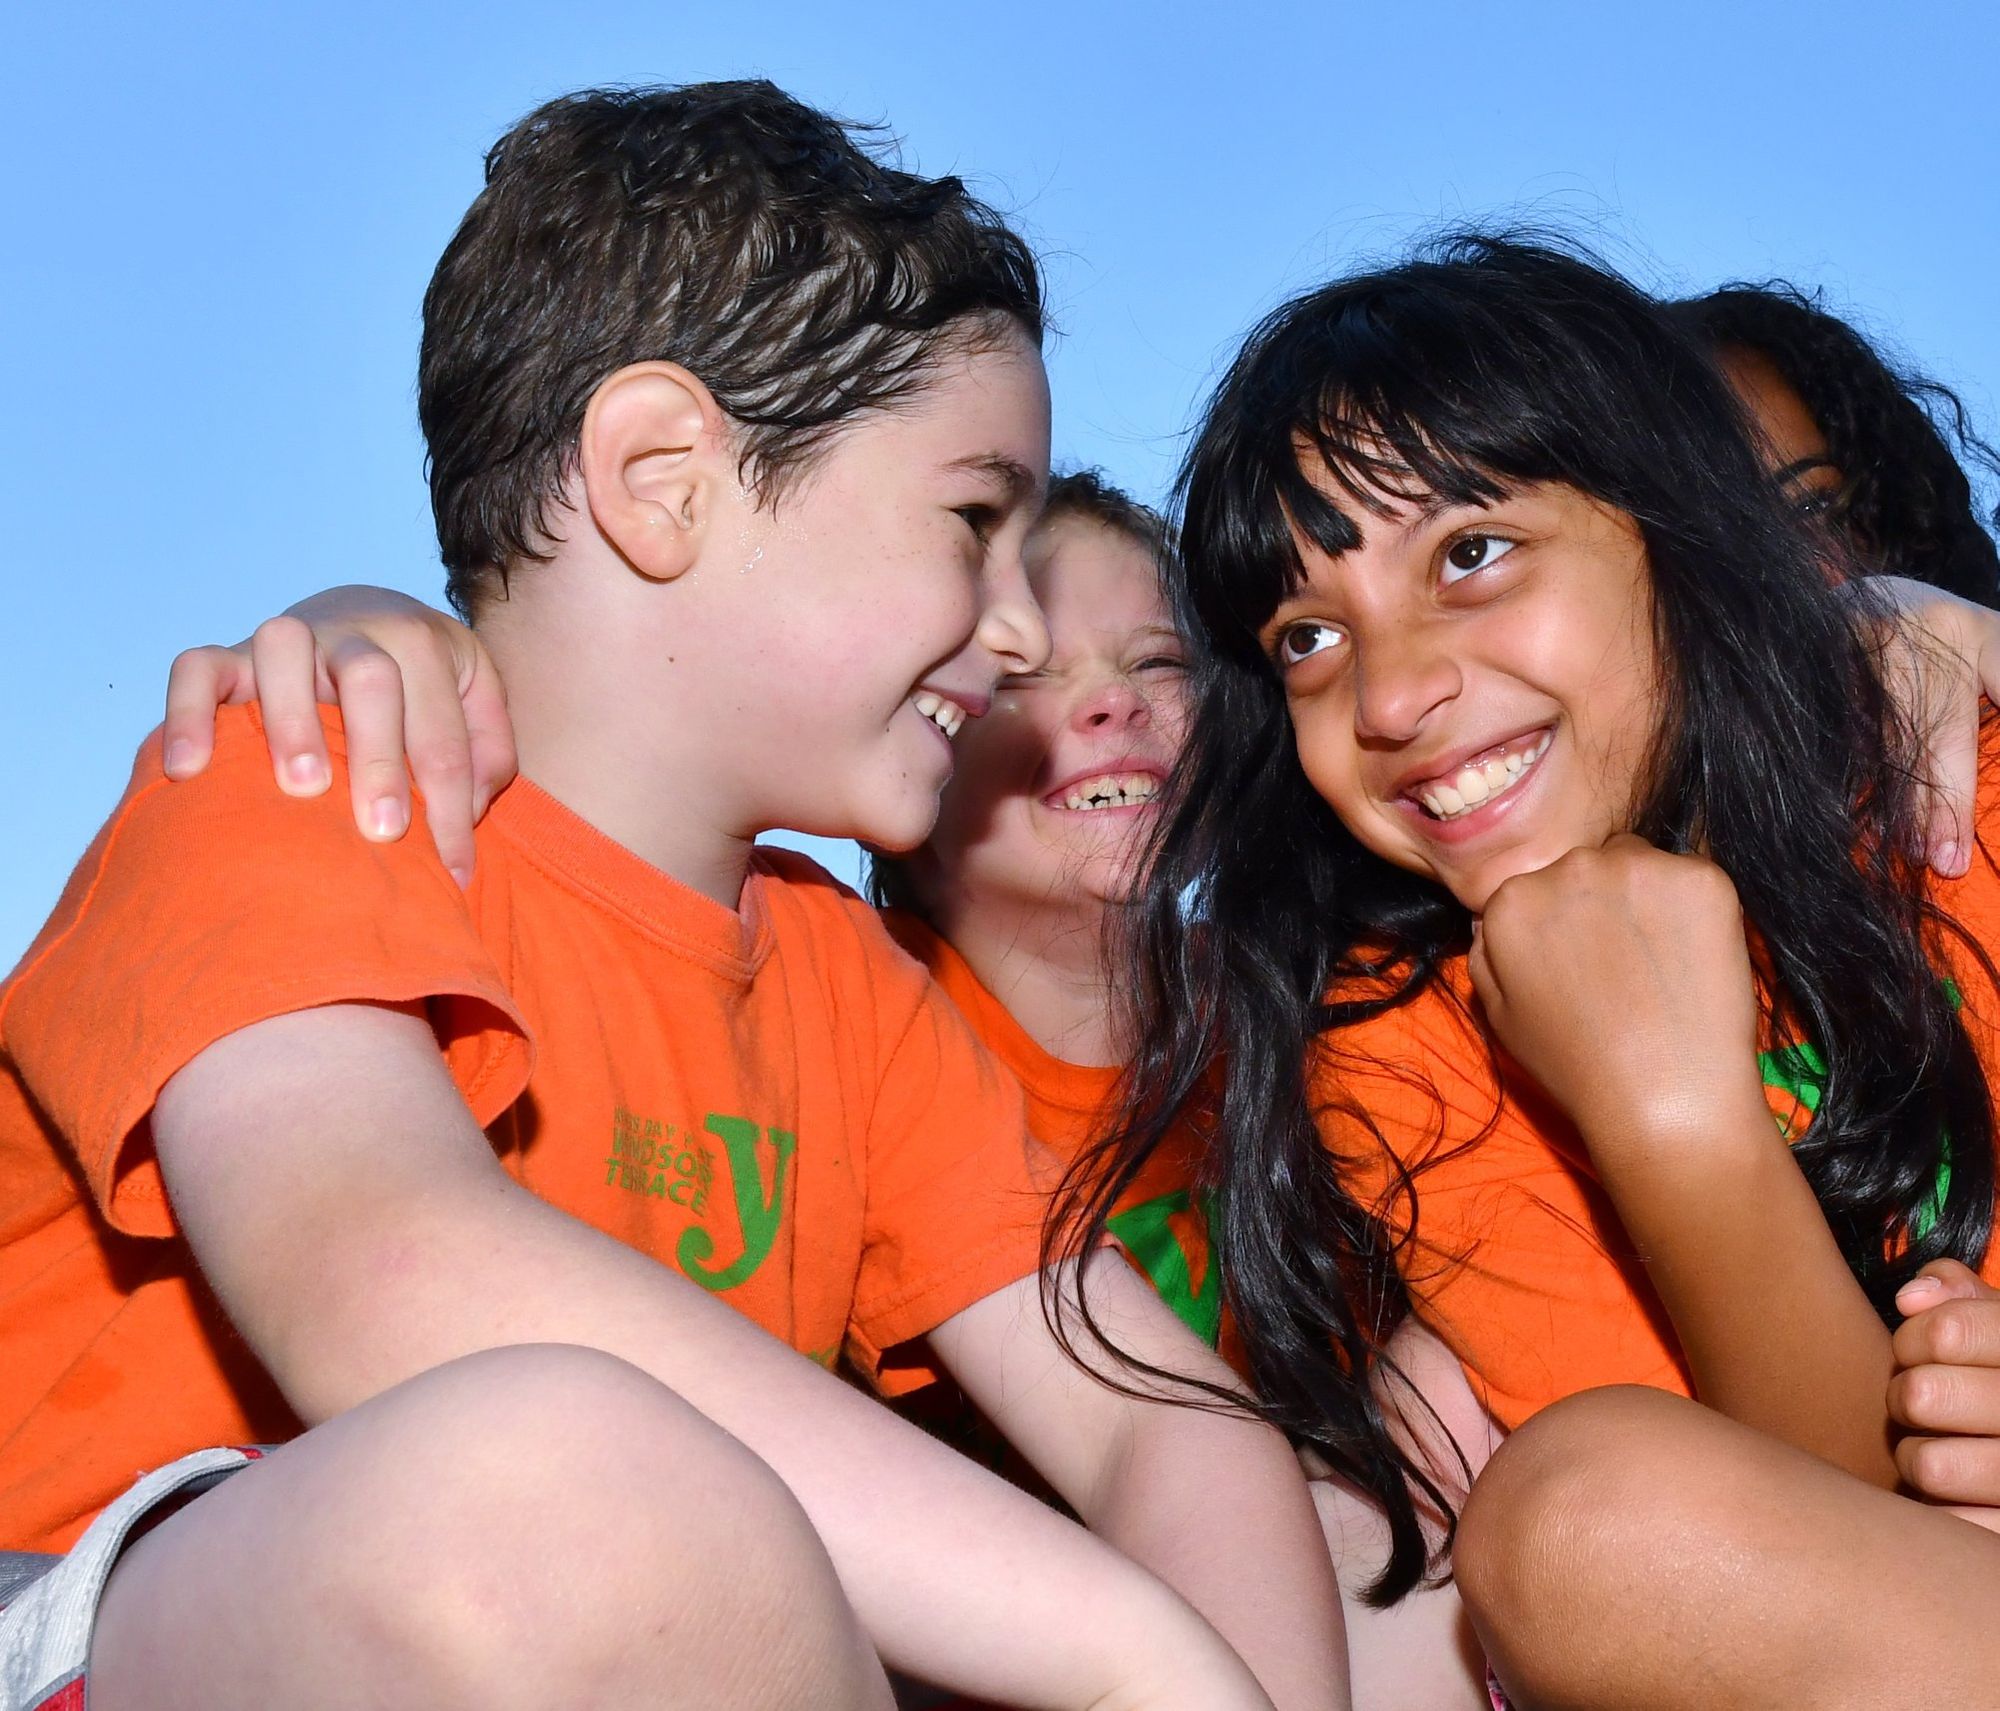 Drumming, gymnastics, art, language immersion – Which summer camp suits your child?